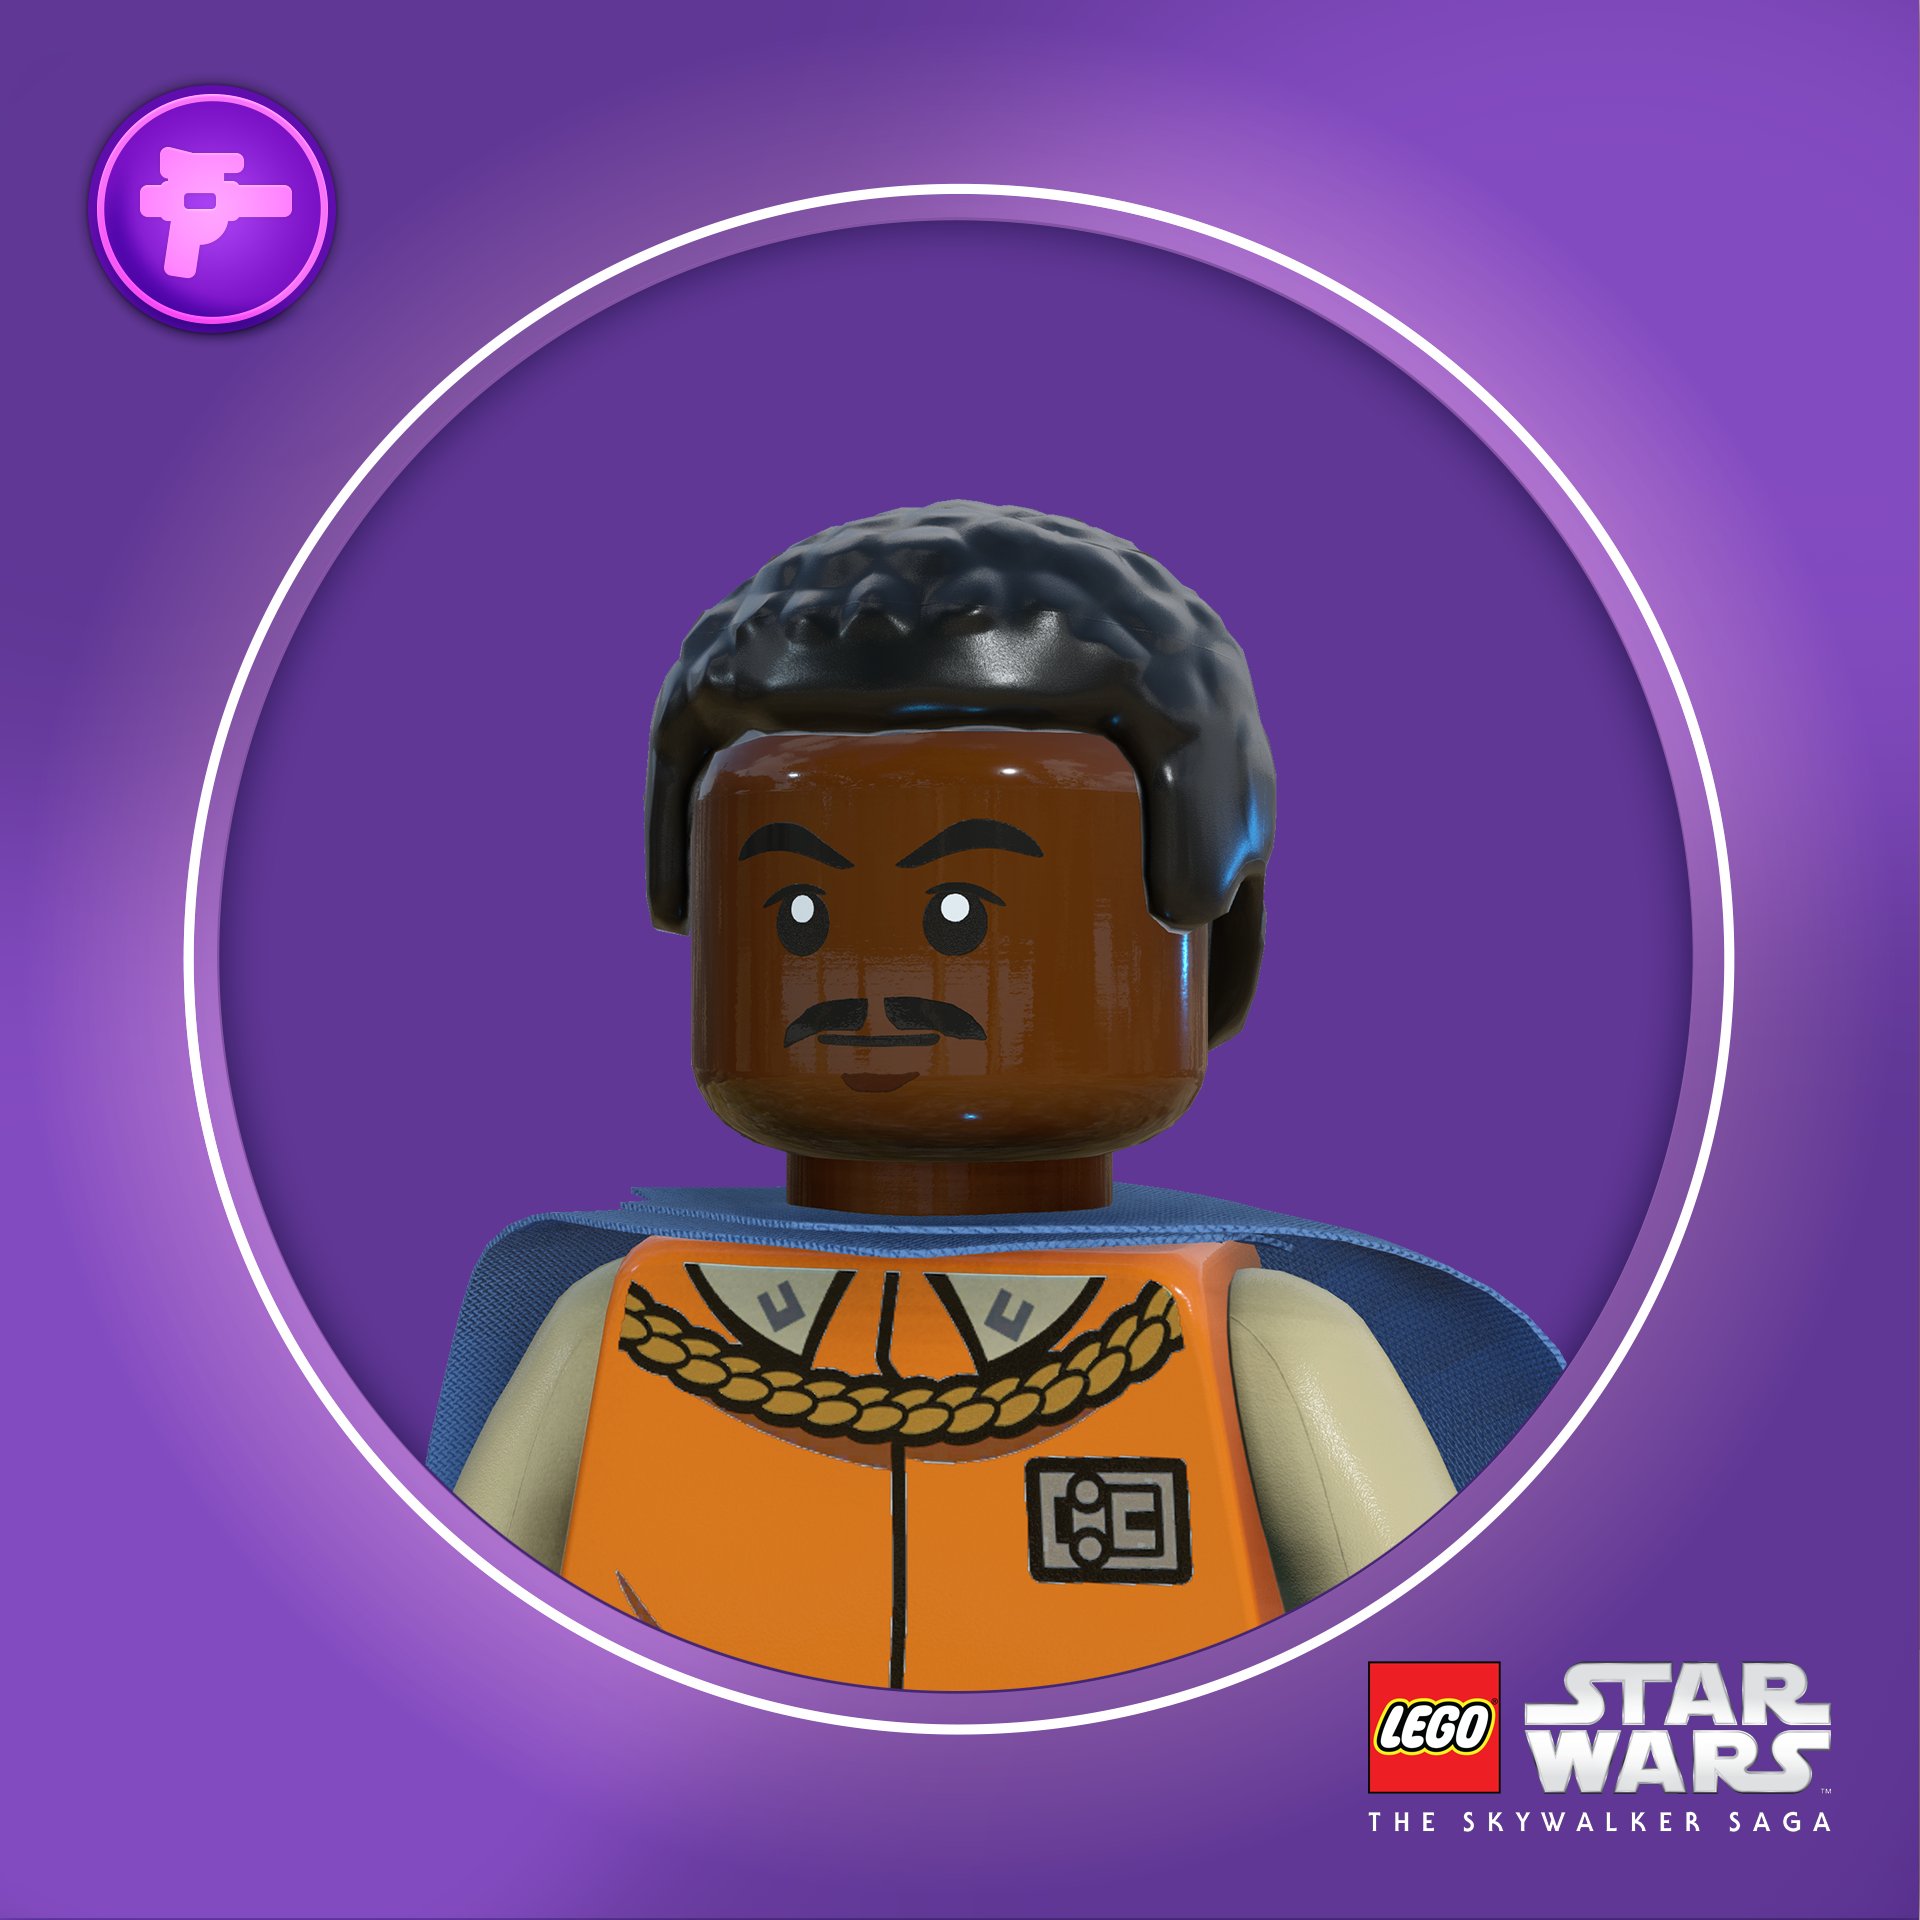 Mathematics married Rarity LEGO Star Wars Game on Twitter: "We figured everyone needed a new profile  pic to celebrate next week's release! We'll post more tomorrow!  #LEGOStarWarsGame https://t.co/03FJRJ9Nyf" / Twitter